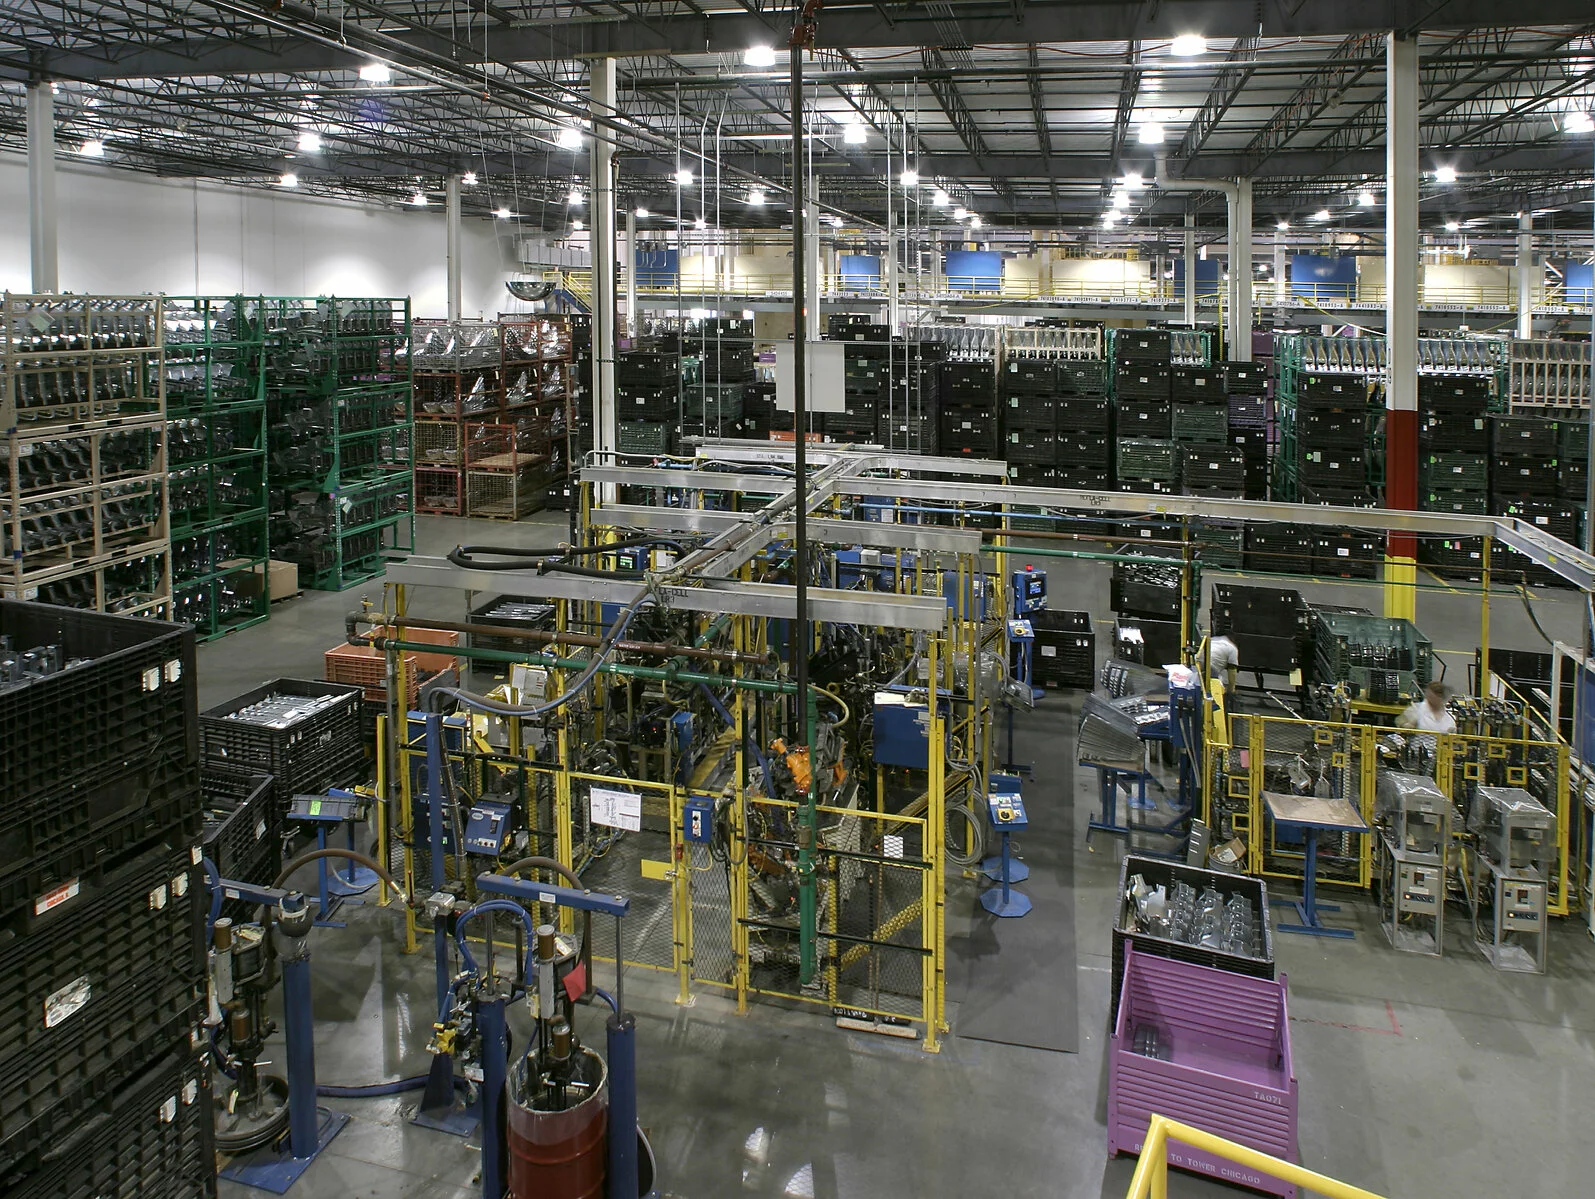 interior manufacturing warehouse, countless rows of crates on shelves, support columns throughout the building.